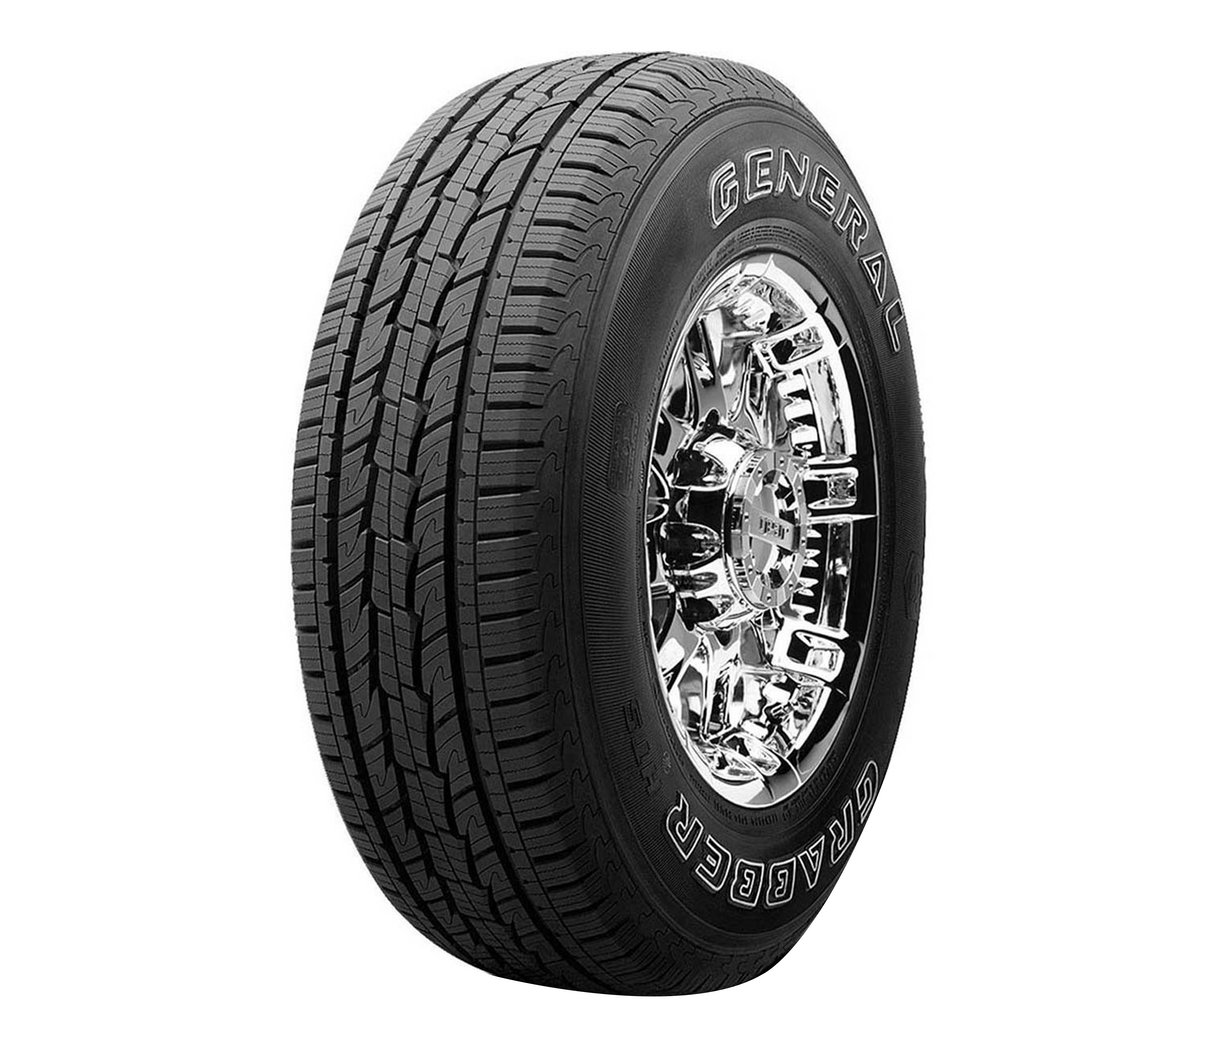 Neumático 245/75R16 111S Grabber HTS General Tire